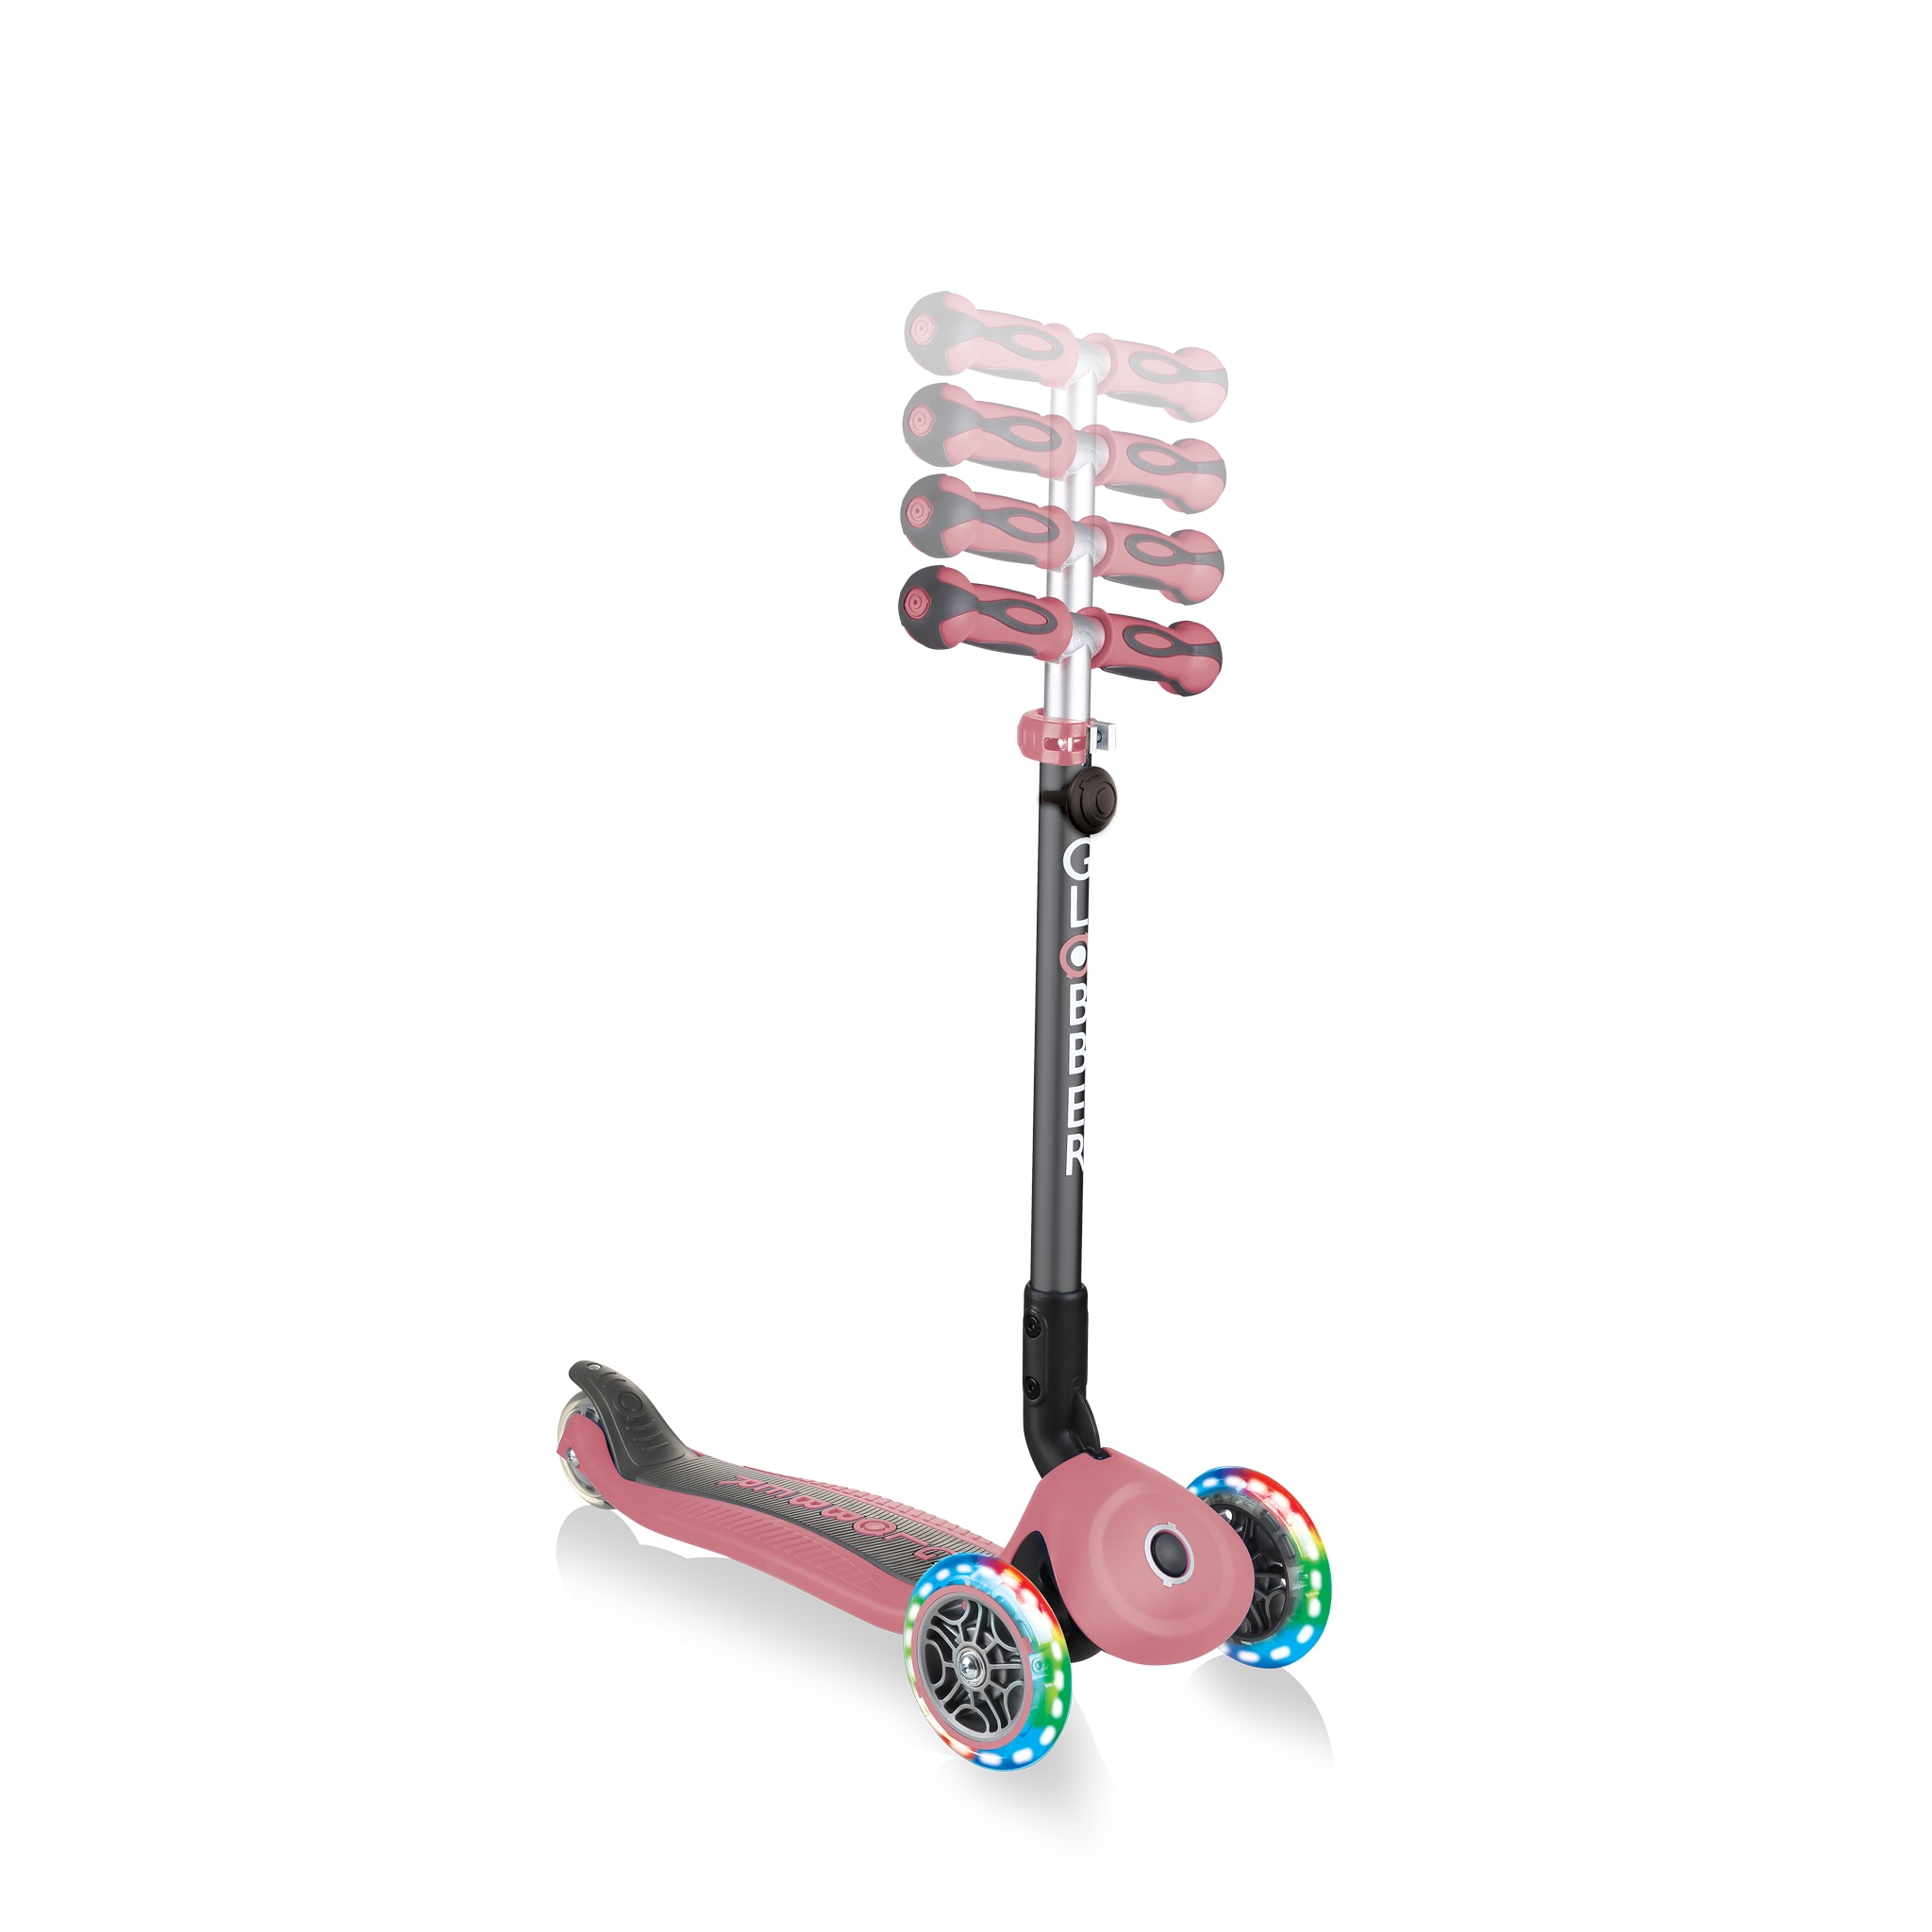 GO-UP-DELUXE-LIGHTS-ride-on-walking-bike-scooter-with-4-height-adjustable-T-bar-and-light-up-wheels-pastel-deep-pink 4